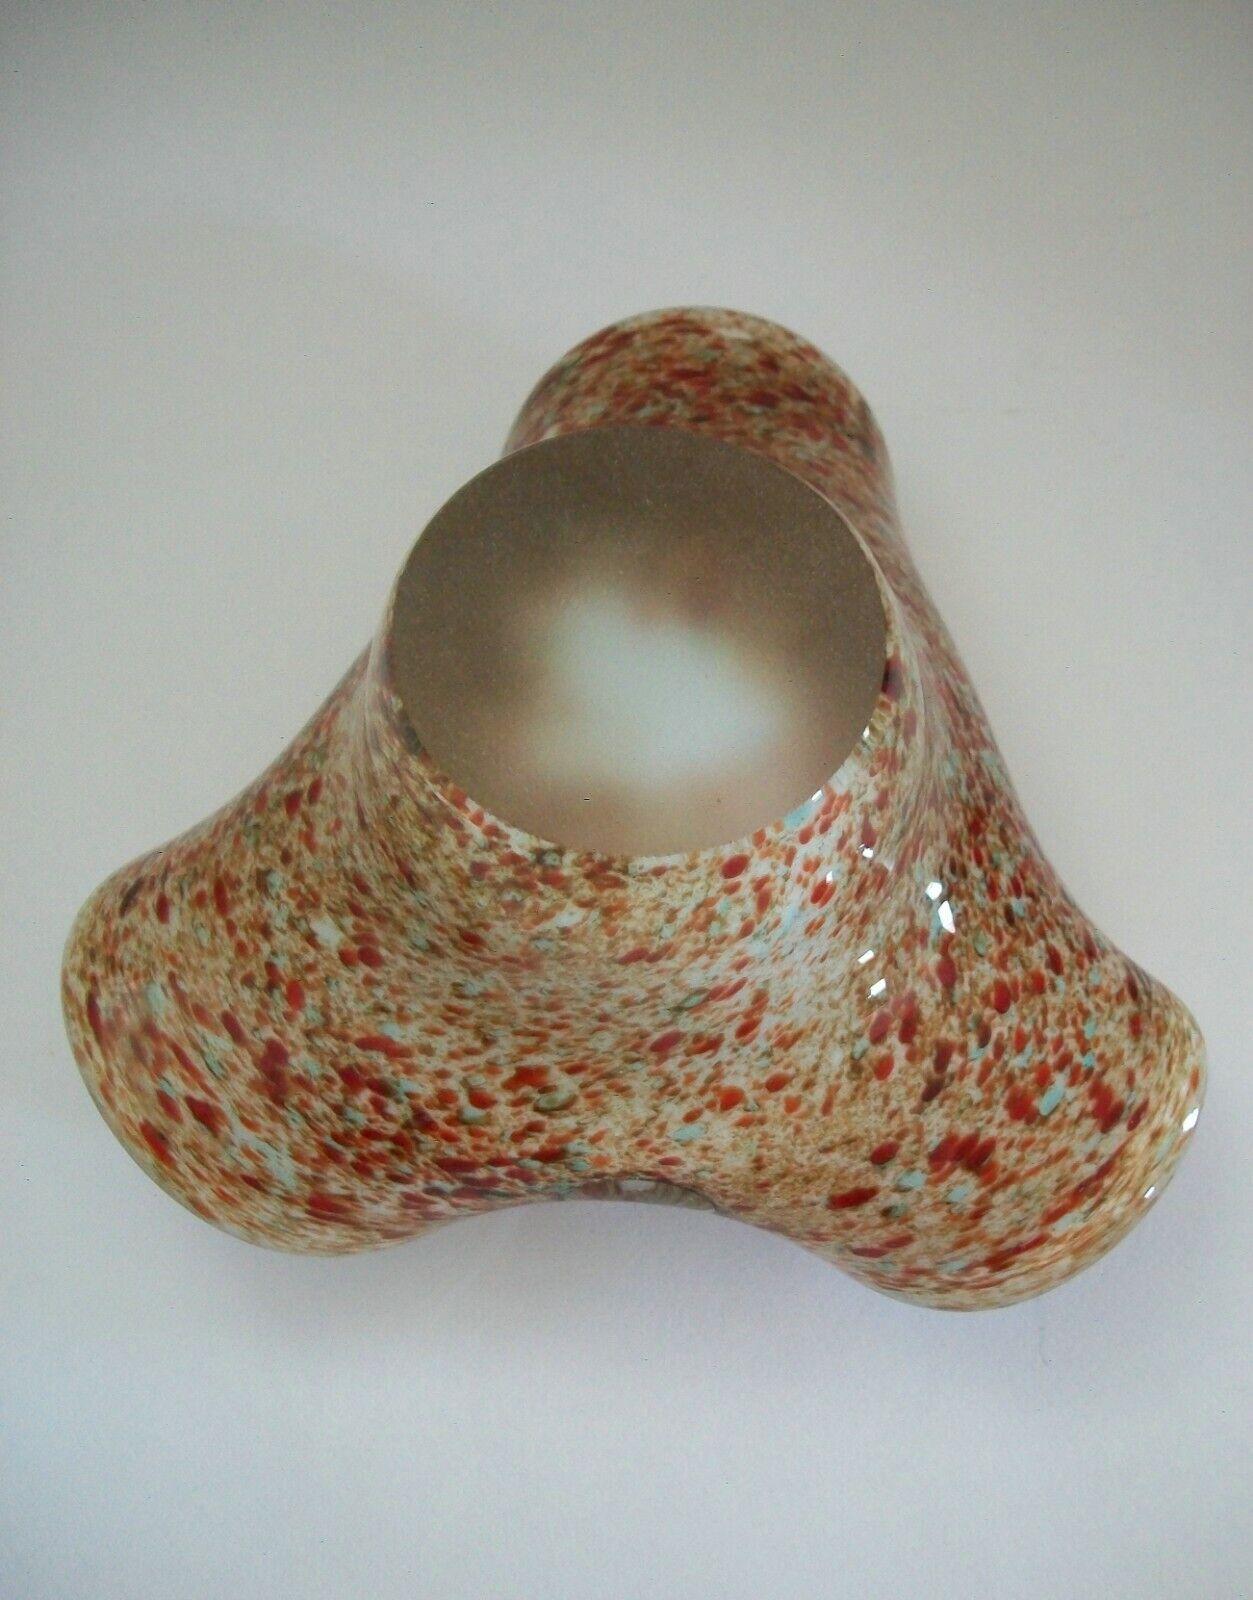 Midcentury Murano Trefoil Speckled Glass Bowl - Unsigned - Italy - circa 1970s For Sale 4